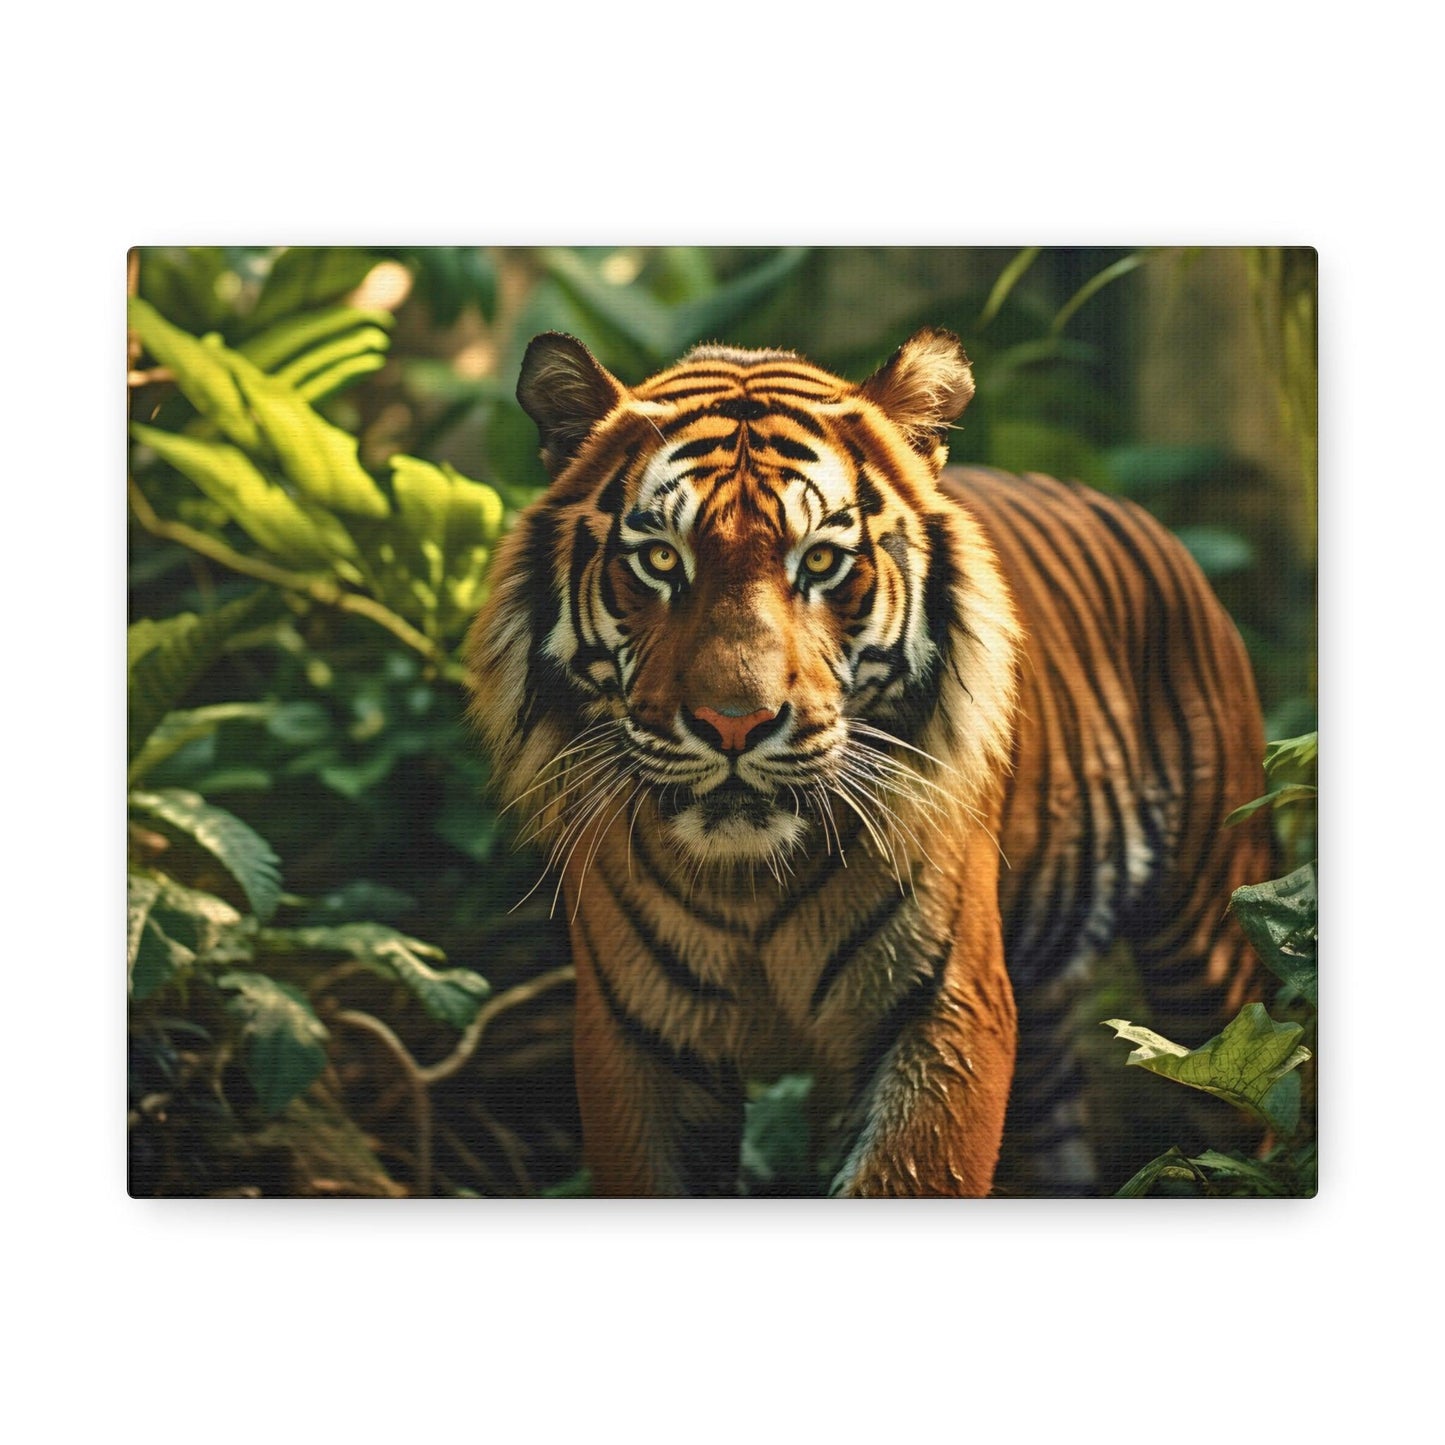 Tiger In Nature Art Canvas Gallery Wraps Tiger Print Large Canvas Art Animal Wall Art minimalist Wall Art Lover Gift - Giftsmojo